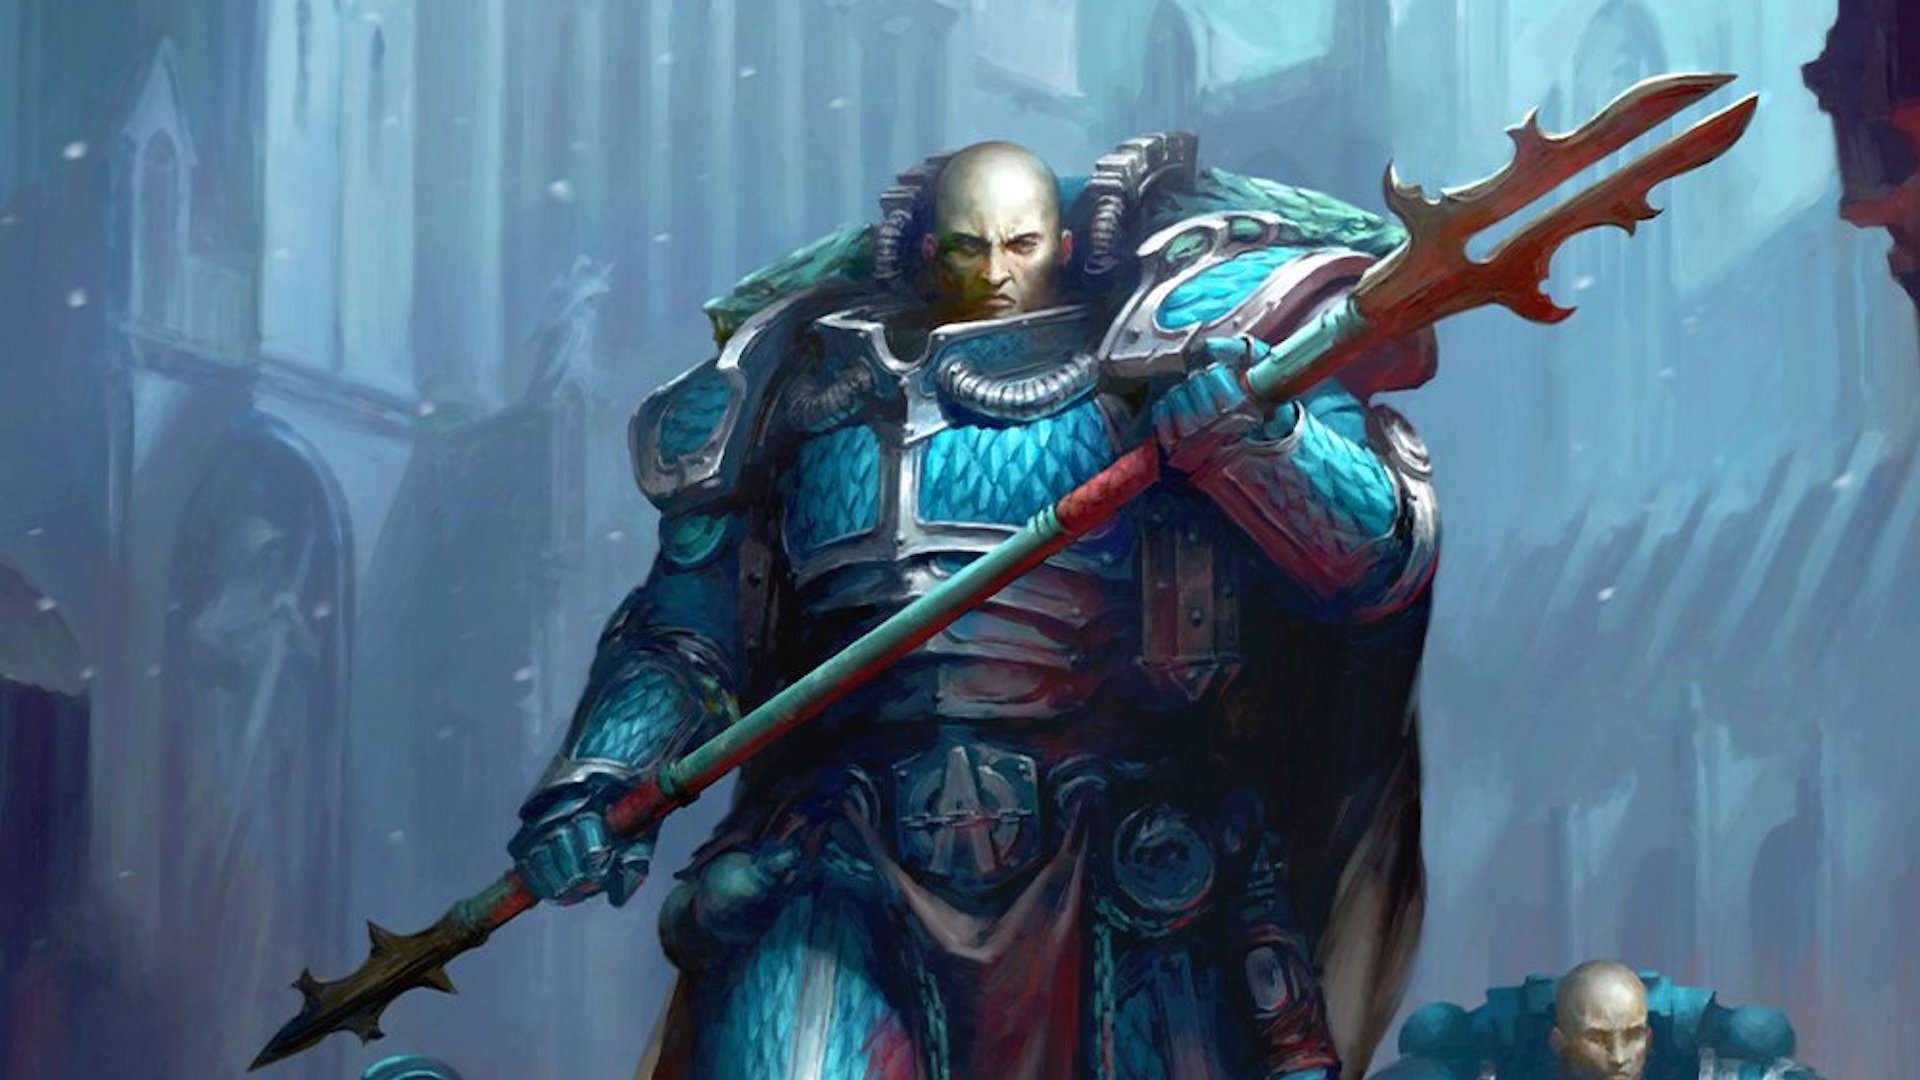 The Masters of Deception: Warhammer 40k Characters Revealed